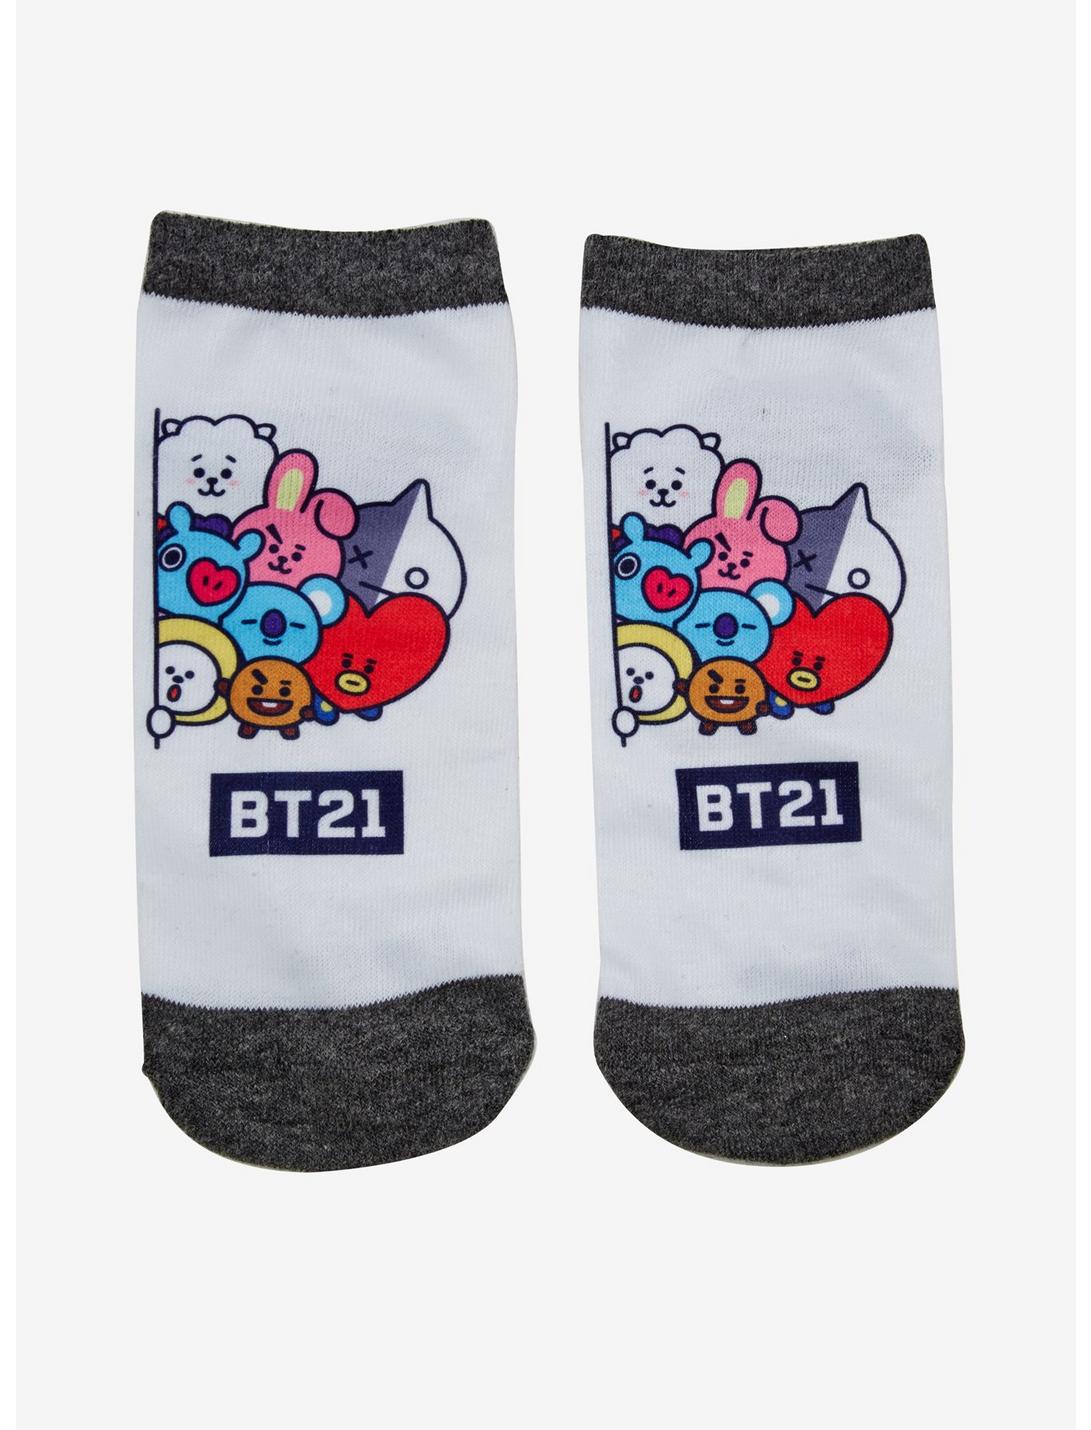 BT21 Group No-Show Socks | Hot Topic